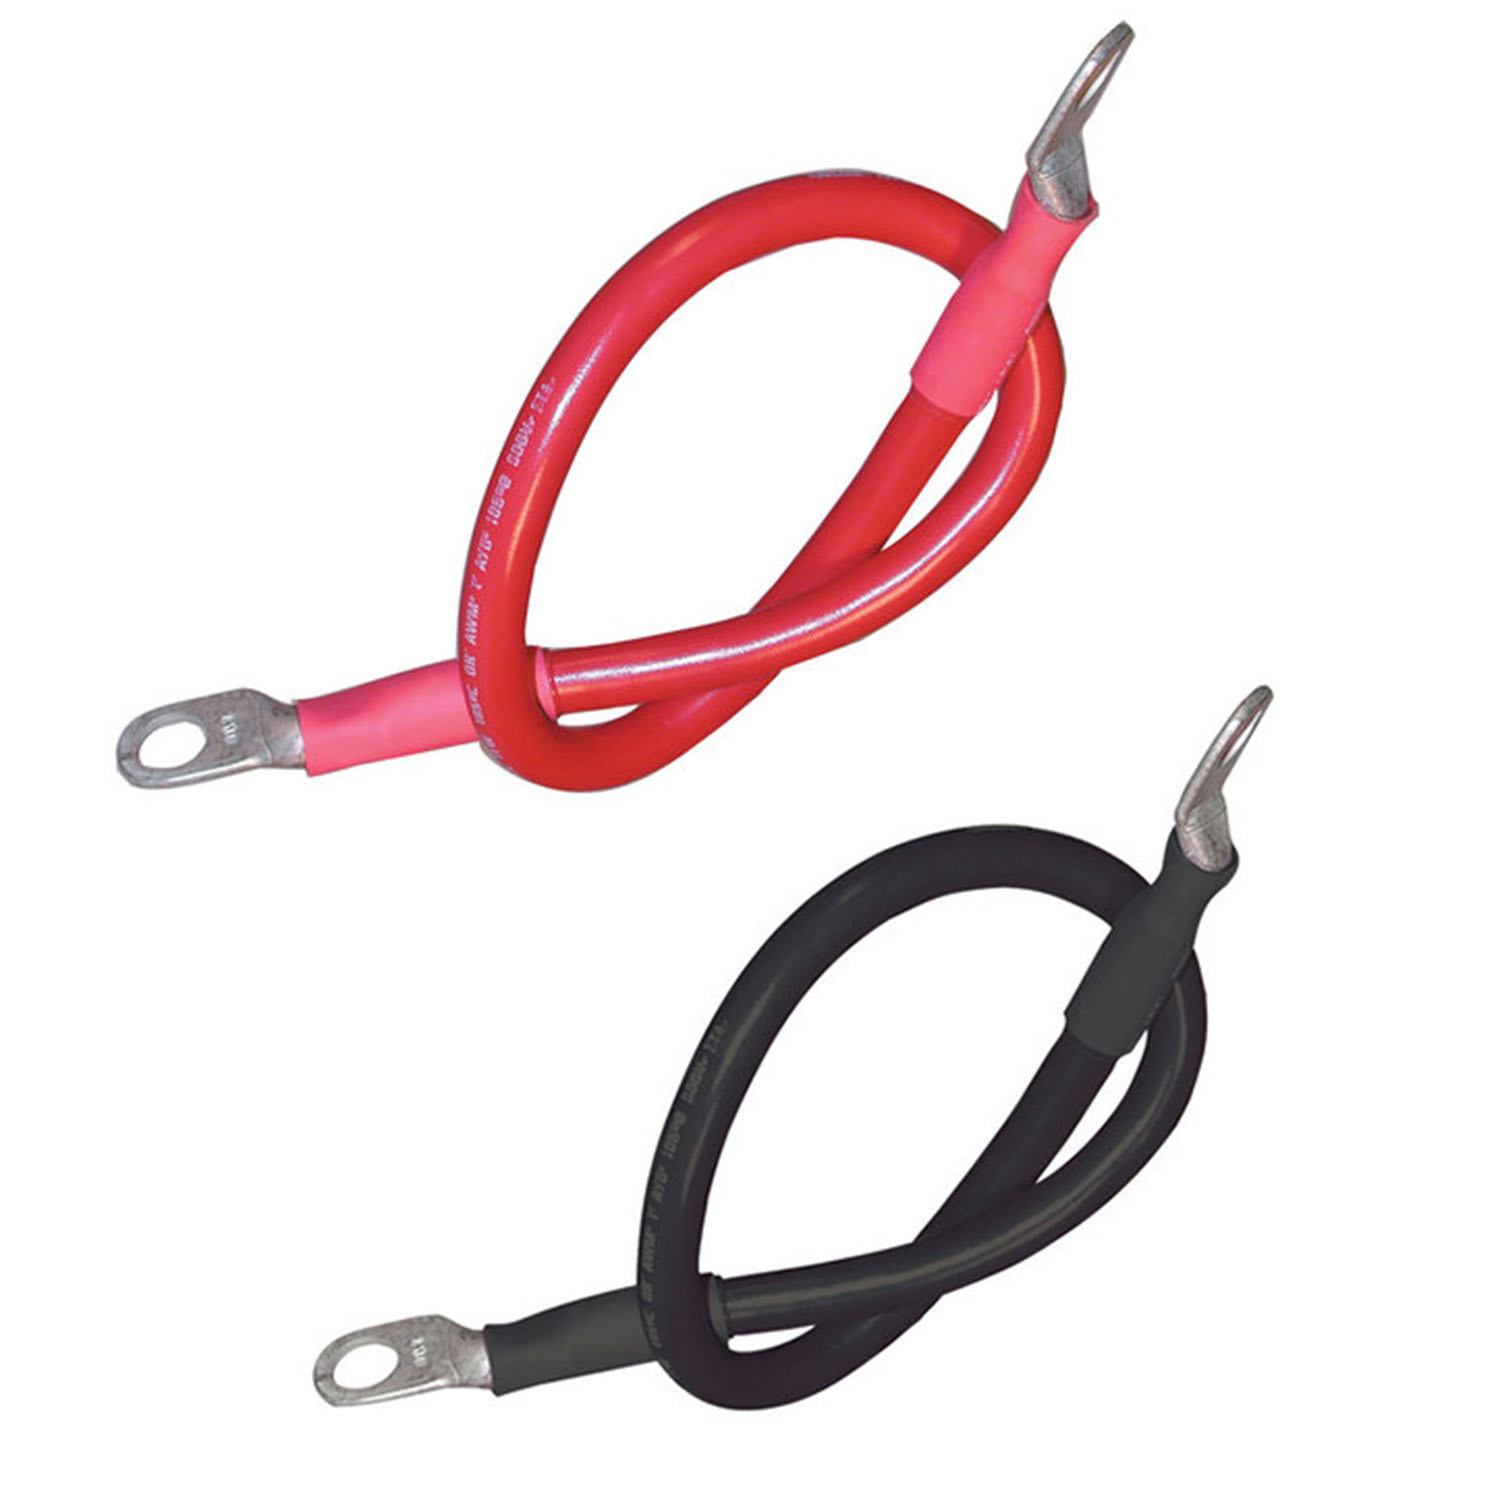 ANCOR Premium 2 AWG & 4 AWG Battery Cable Assemblies